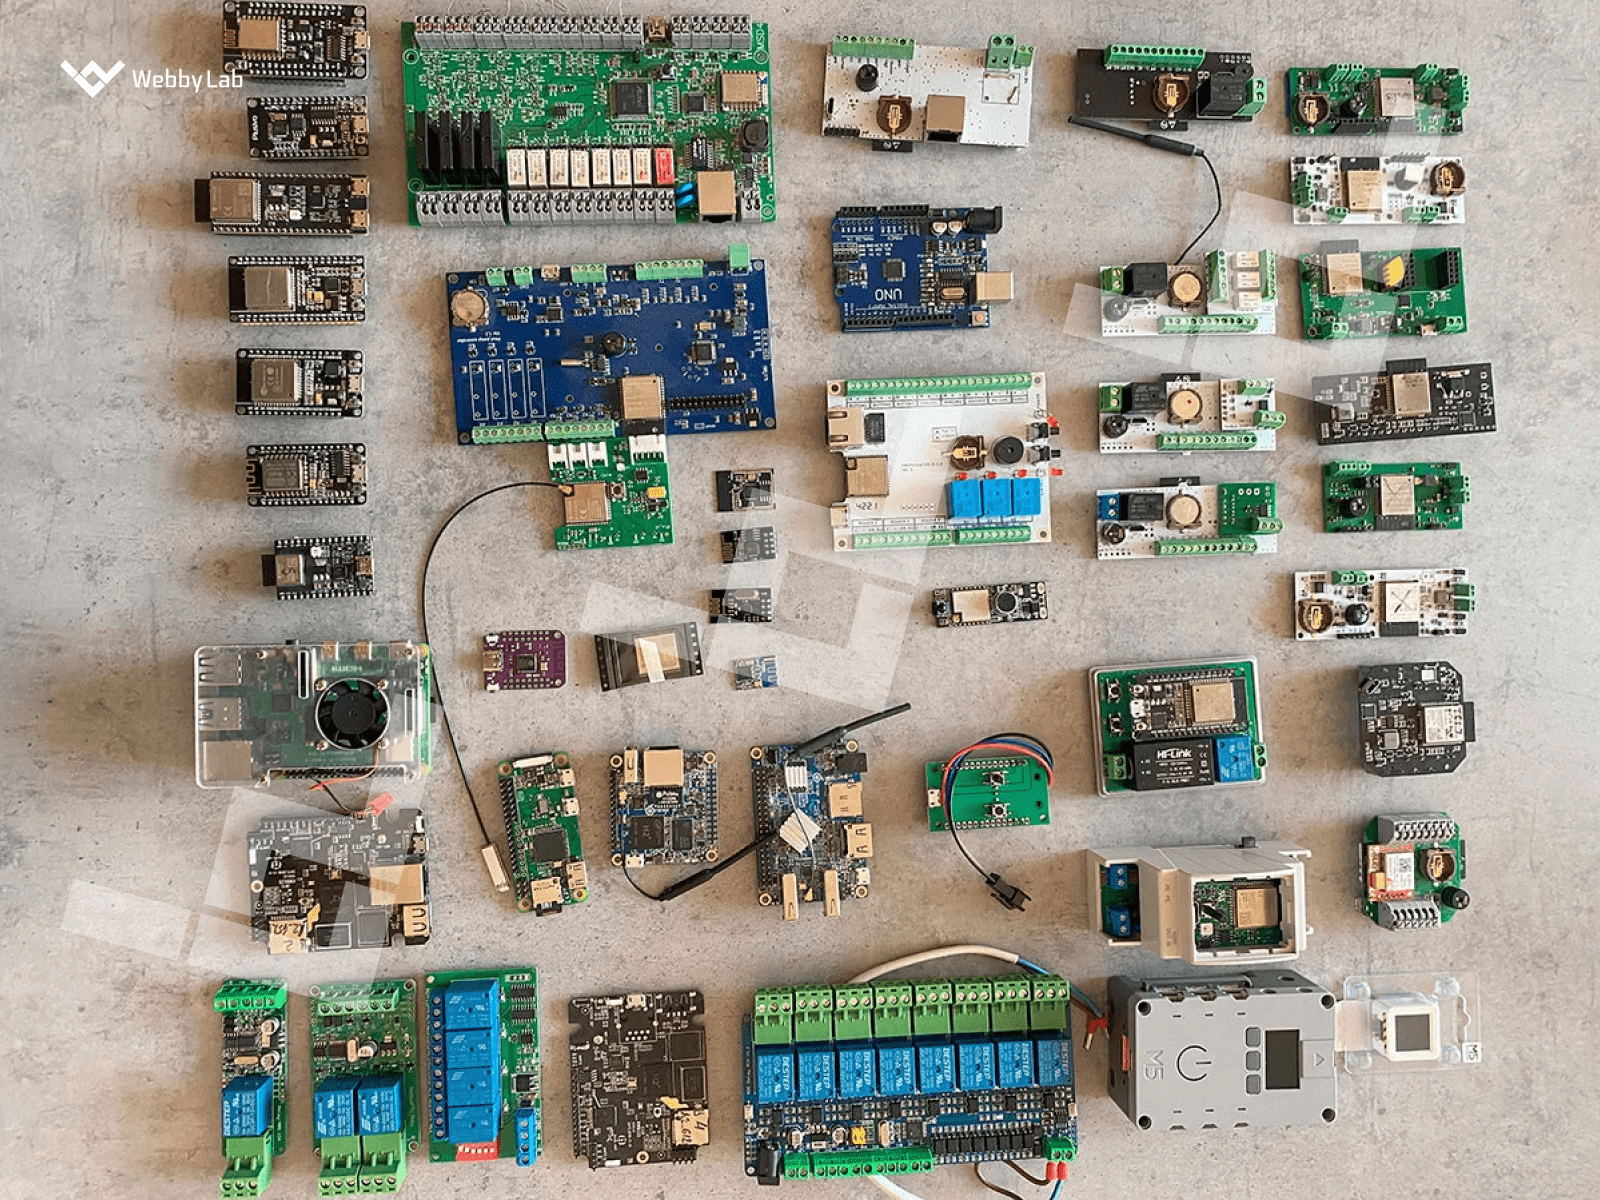 The selection of various circuit boards tested/made by WebbyLab, with Propuskator controllers among them